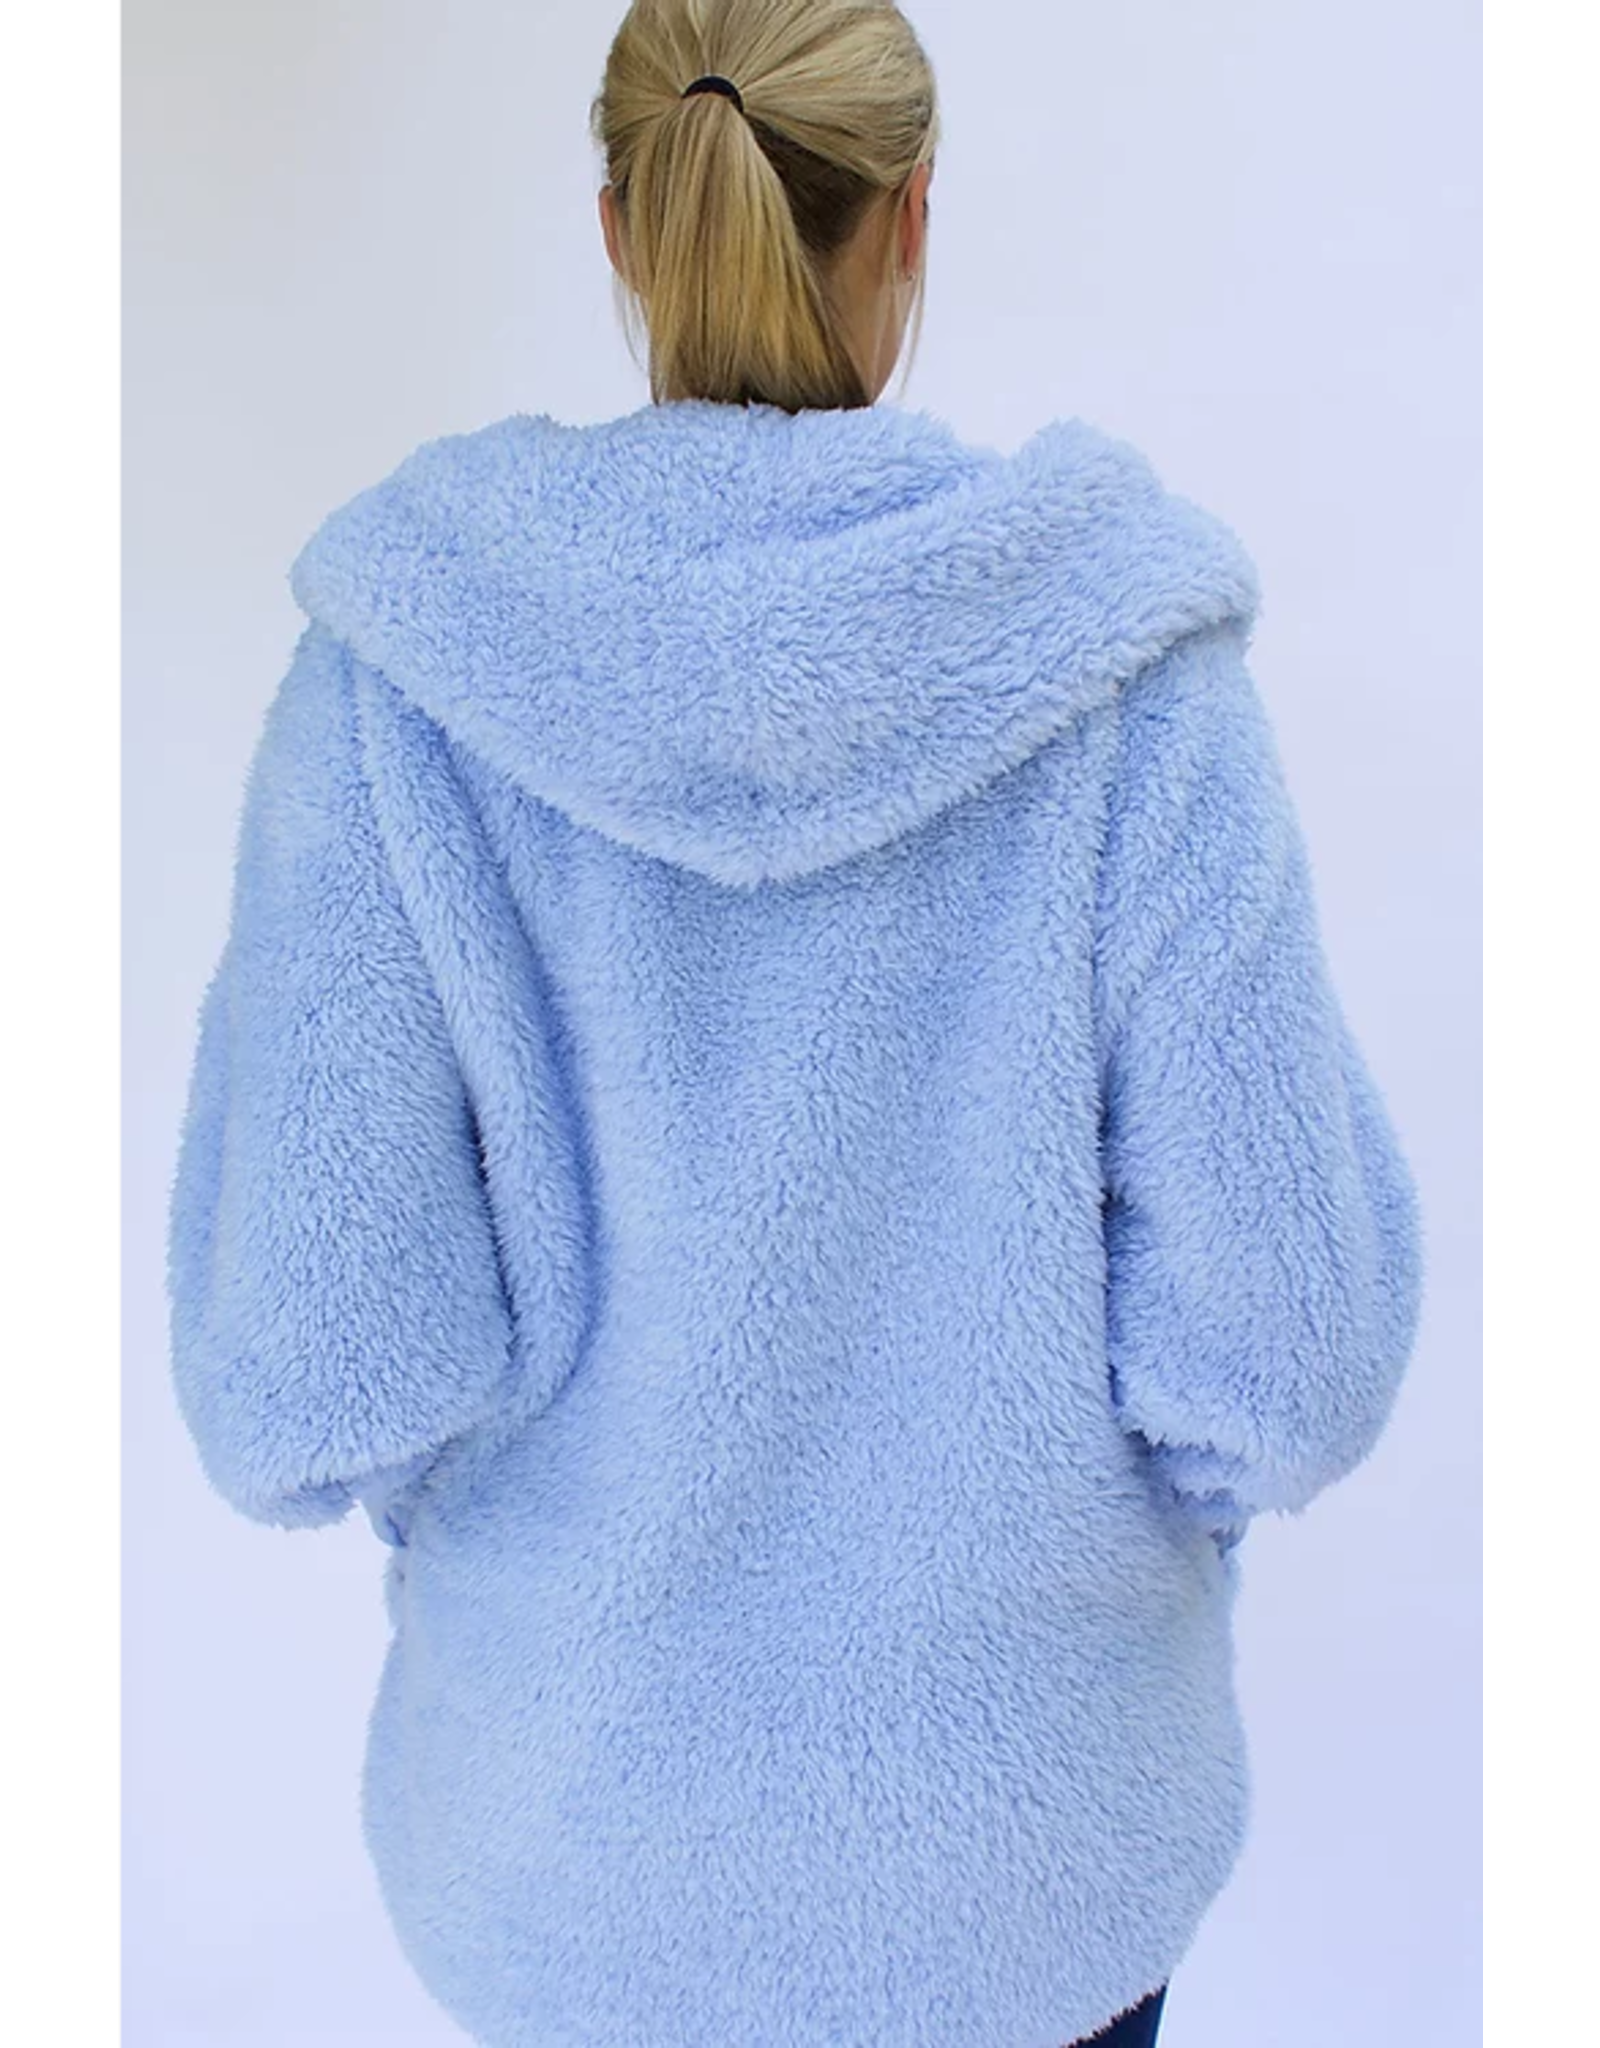 Nordic Beach Nordic Beach NB-CB Cozy Hooded Wrap One Size Cashmere Blue